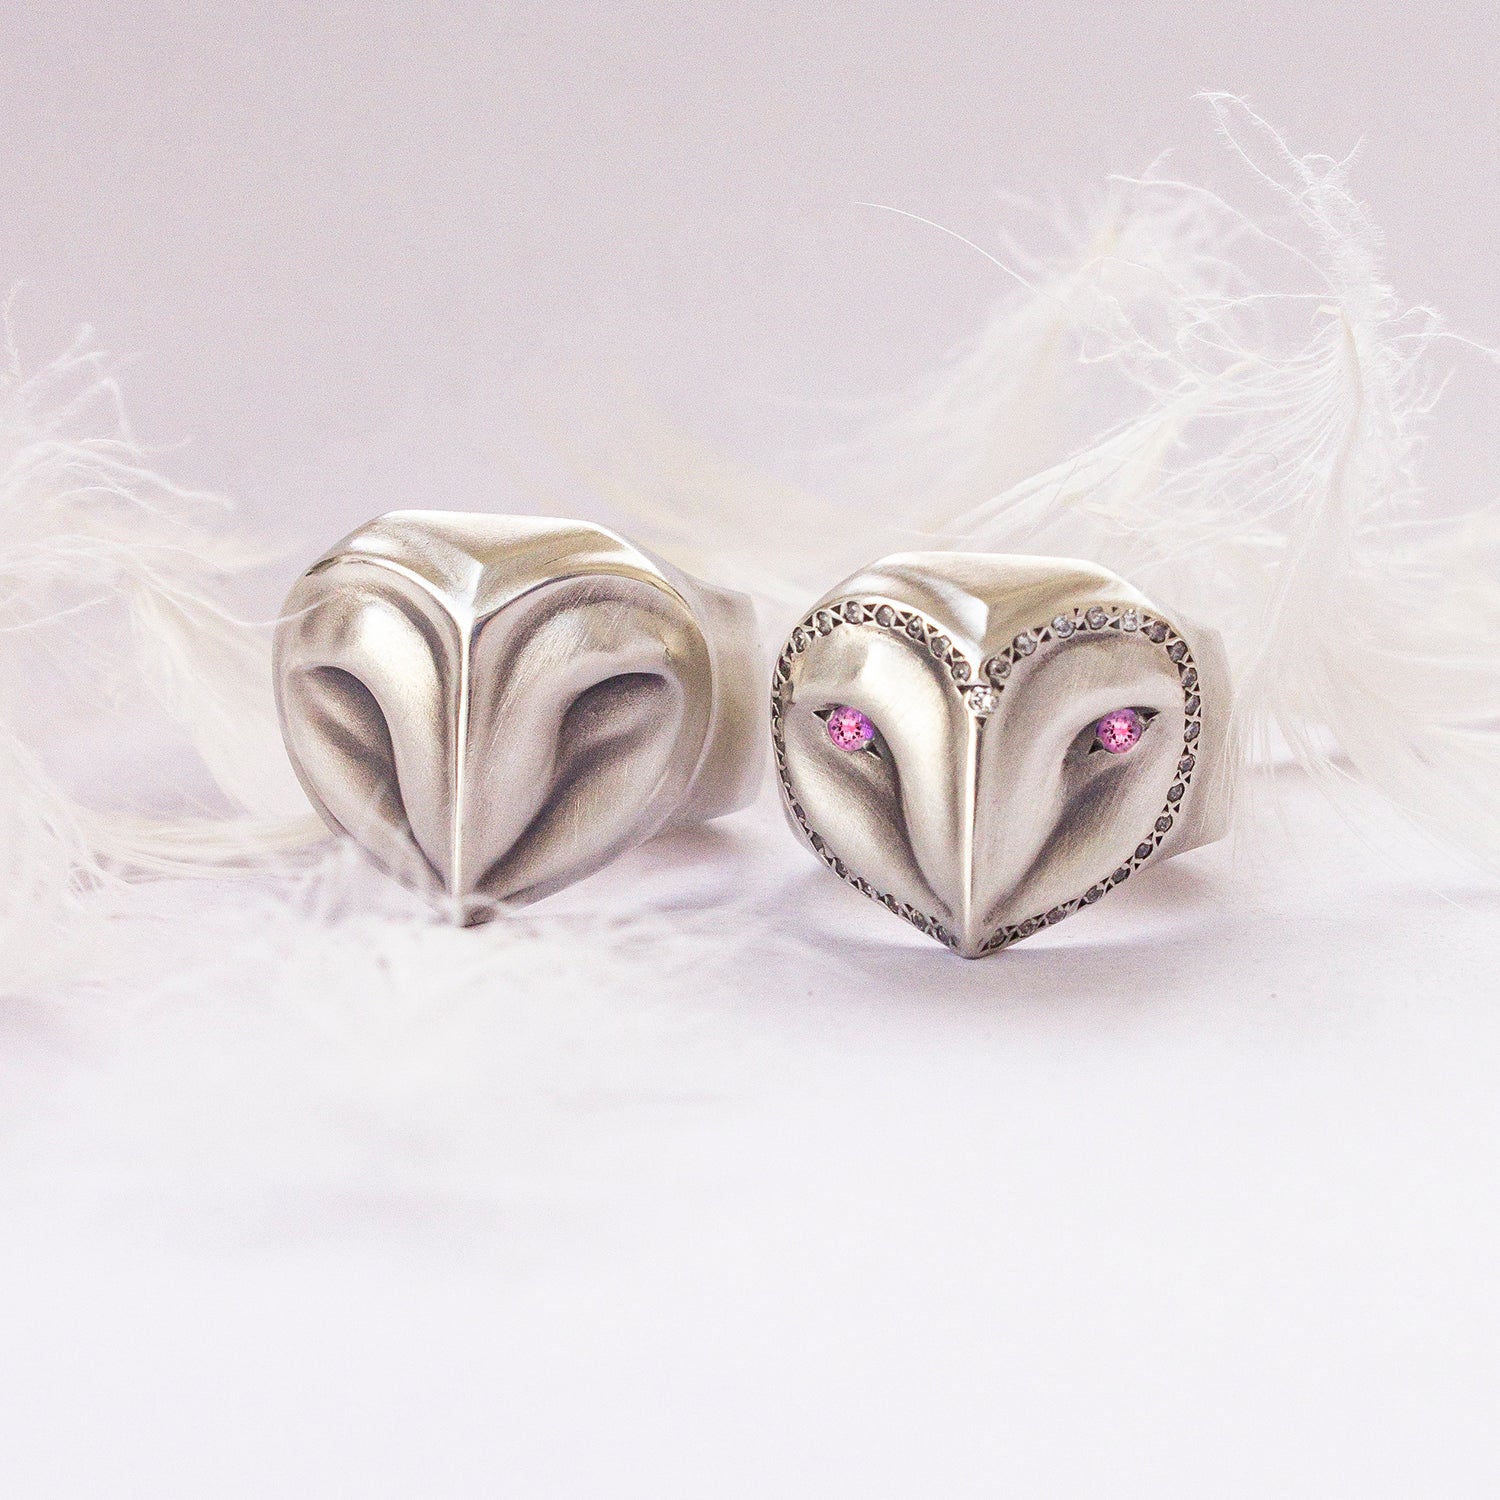 ELINA GLEIZER Limited Edition Barn Owl Ring with Diamonds and Tourmalines